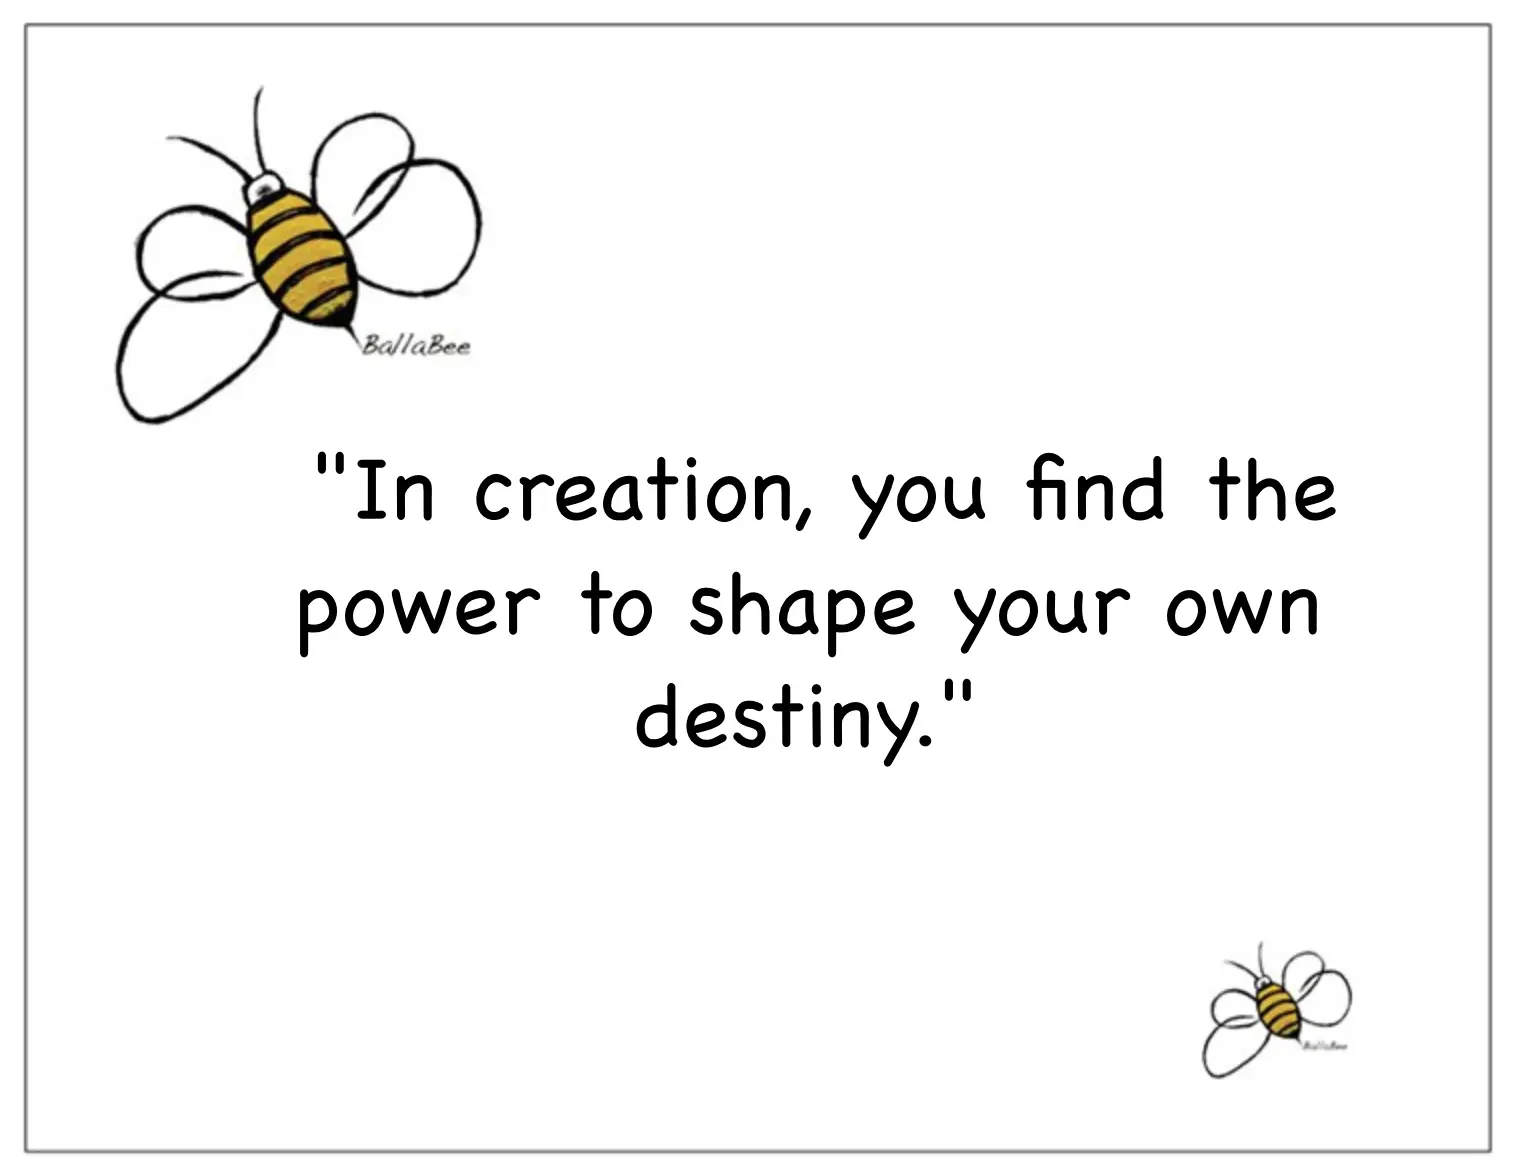 In creation, you find the power to shape your own destiny